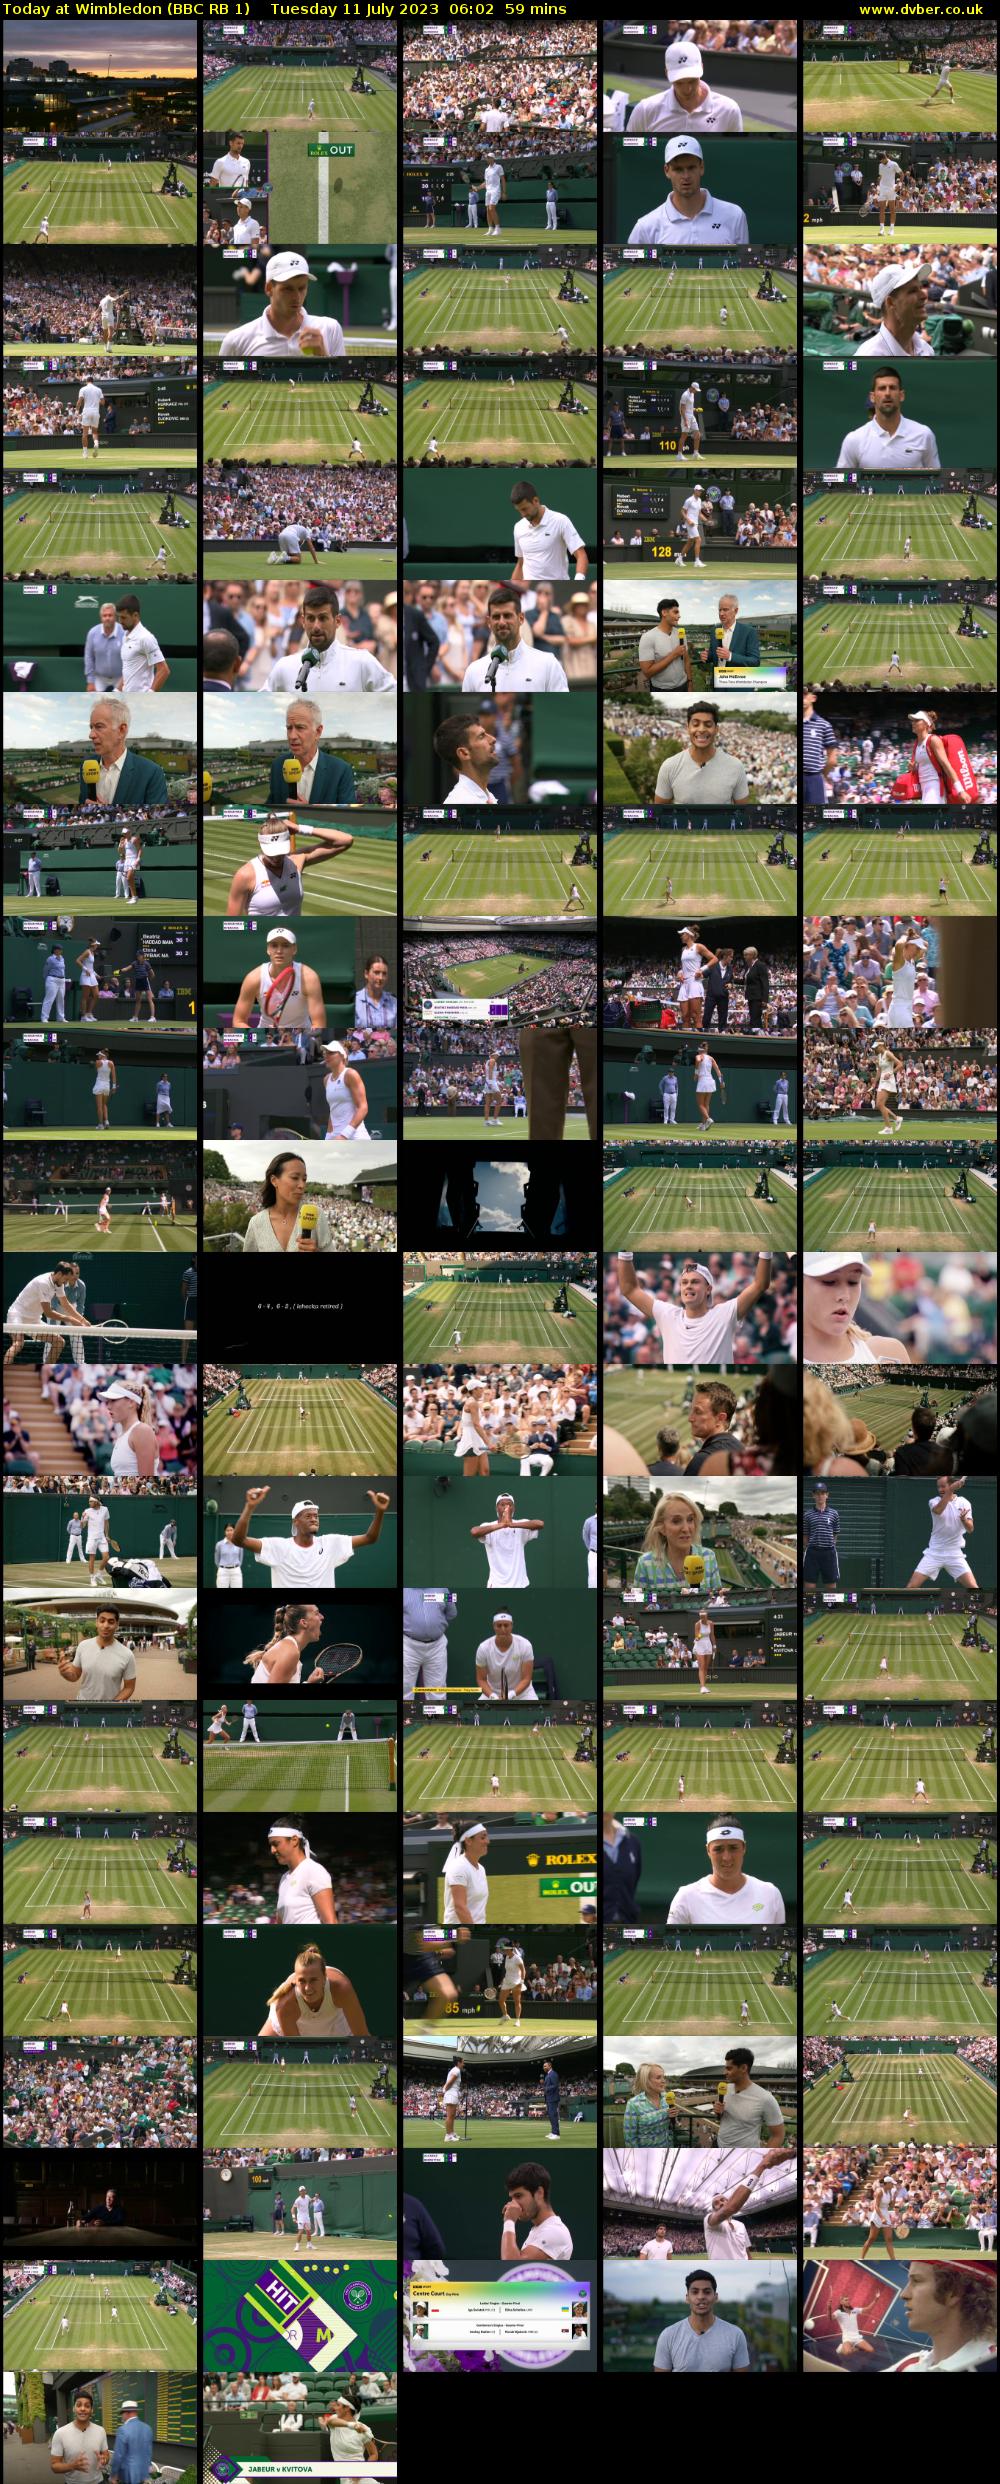 Today at Wimbledon (BBC RB 1) Tuesday 11 July 2023 06:02 - 07:01